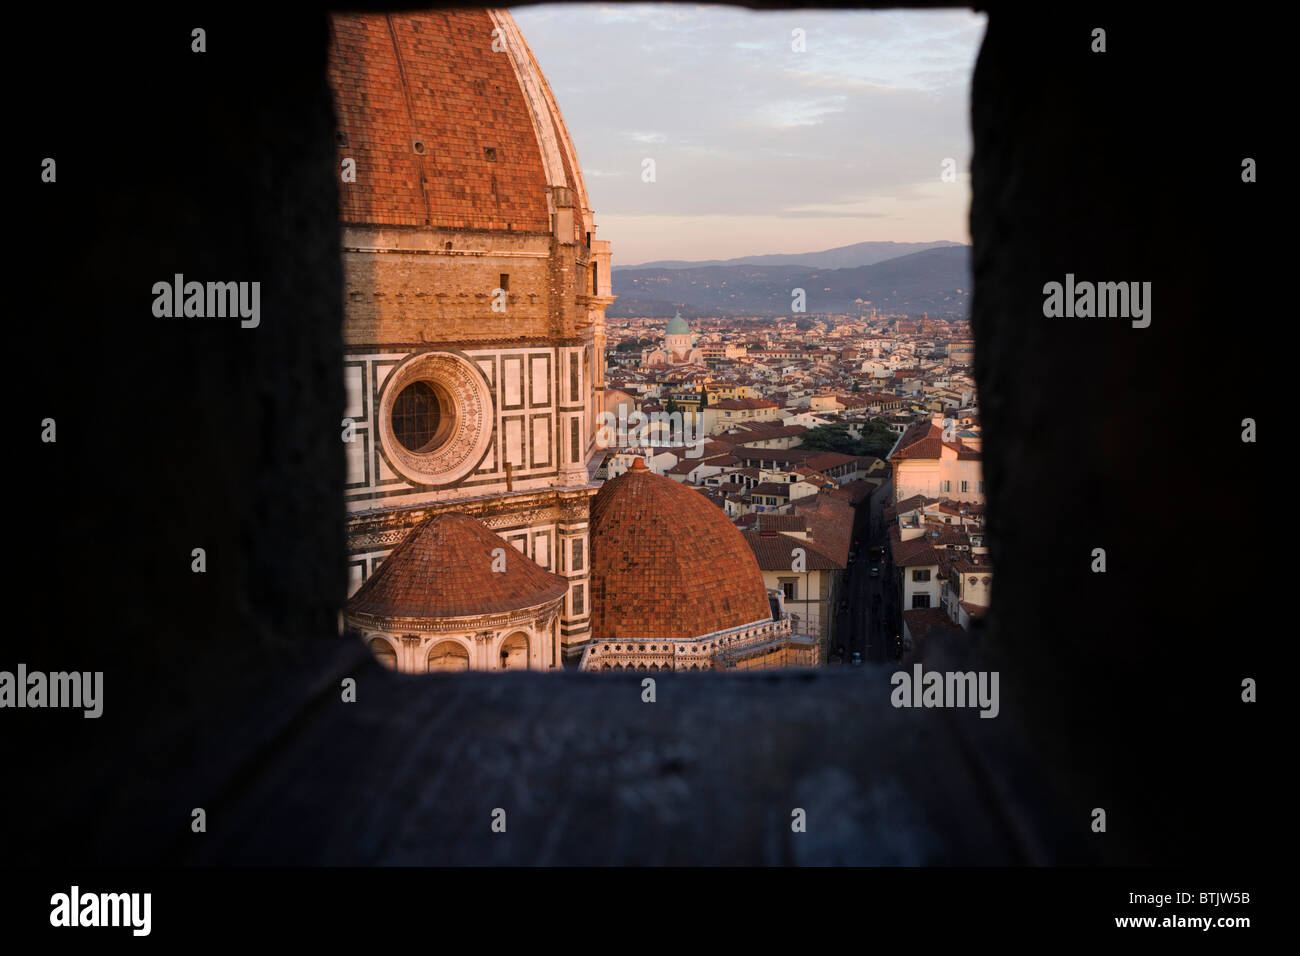 Brunelleschi's Dome seen from a portal within Giotto's Bell Tower (the campanile), Florence.. Stock Photo